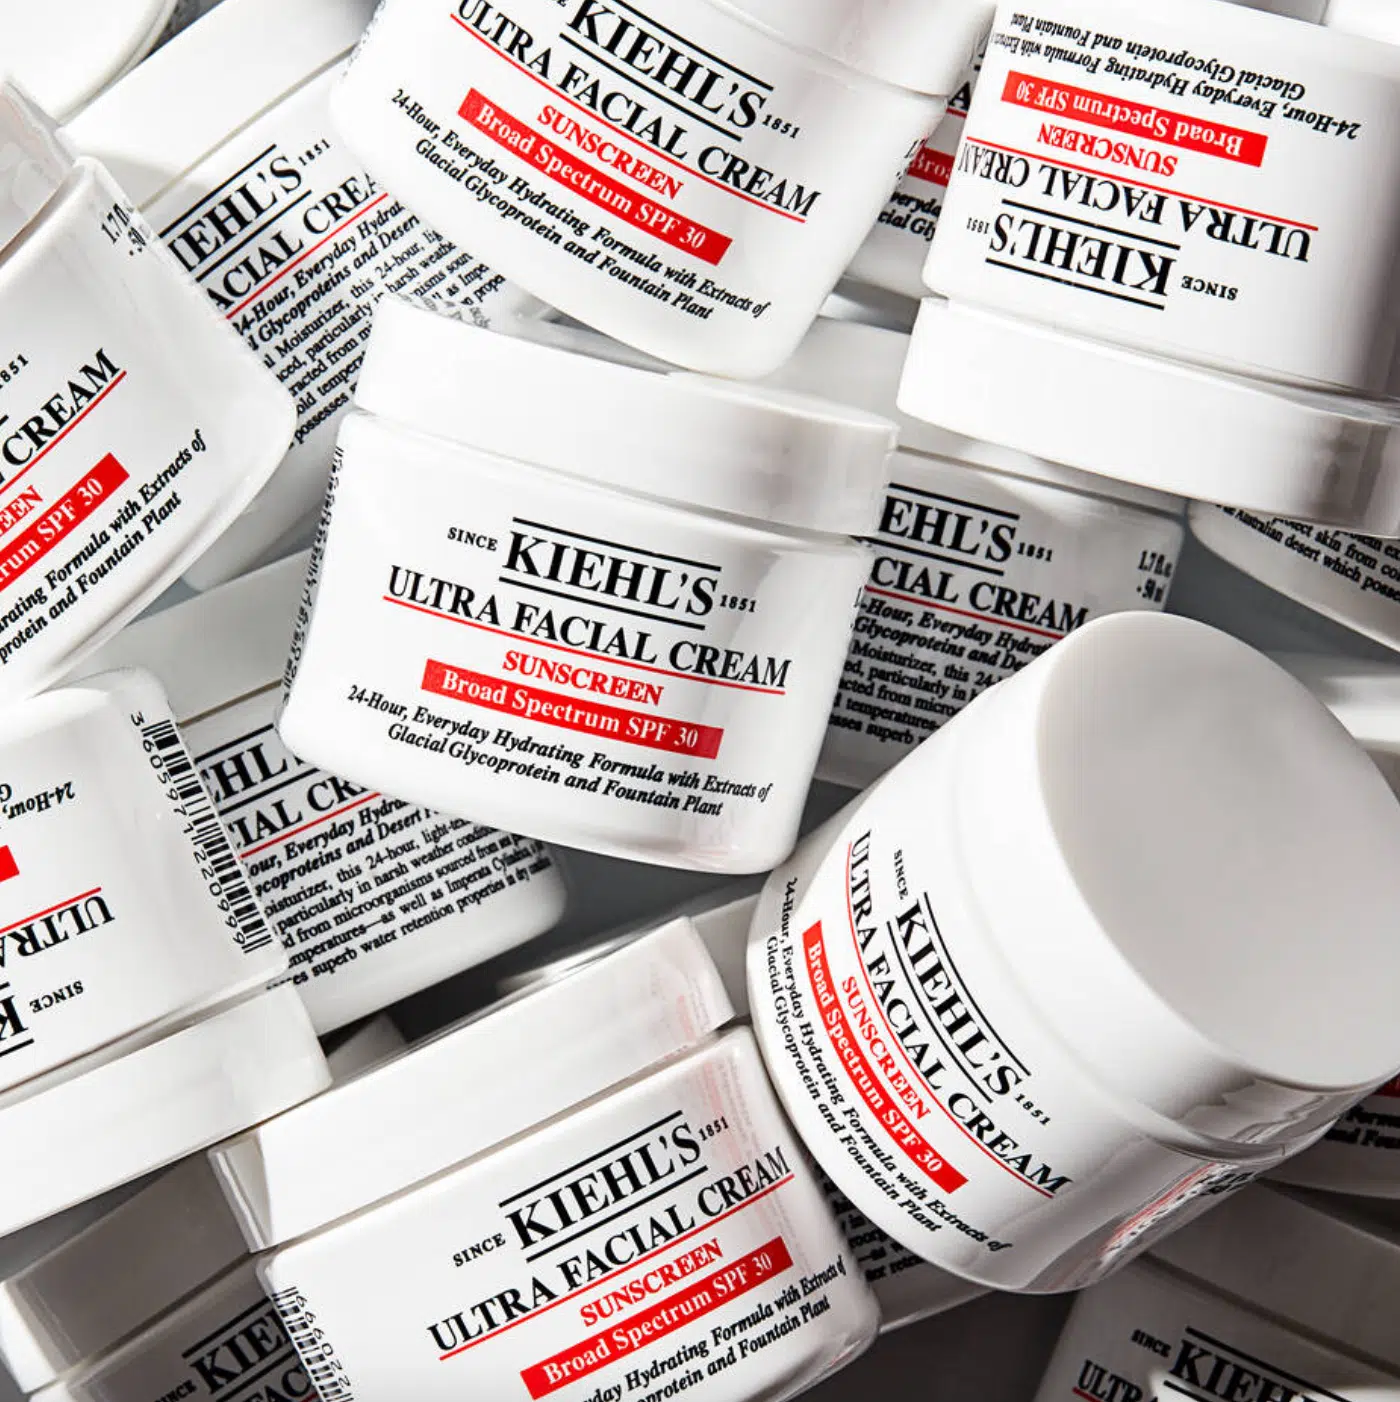 Best Kiehl's products to try, by beauty blogger What The Fab